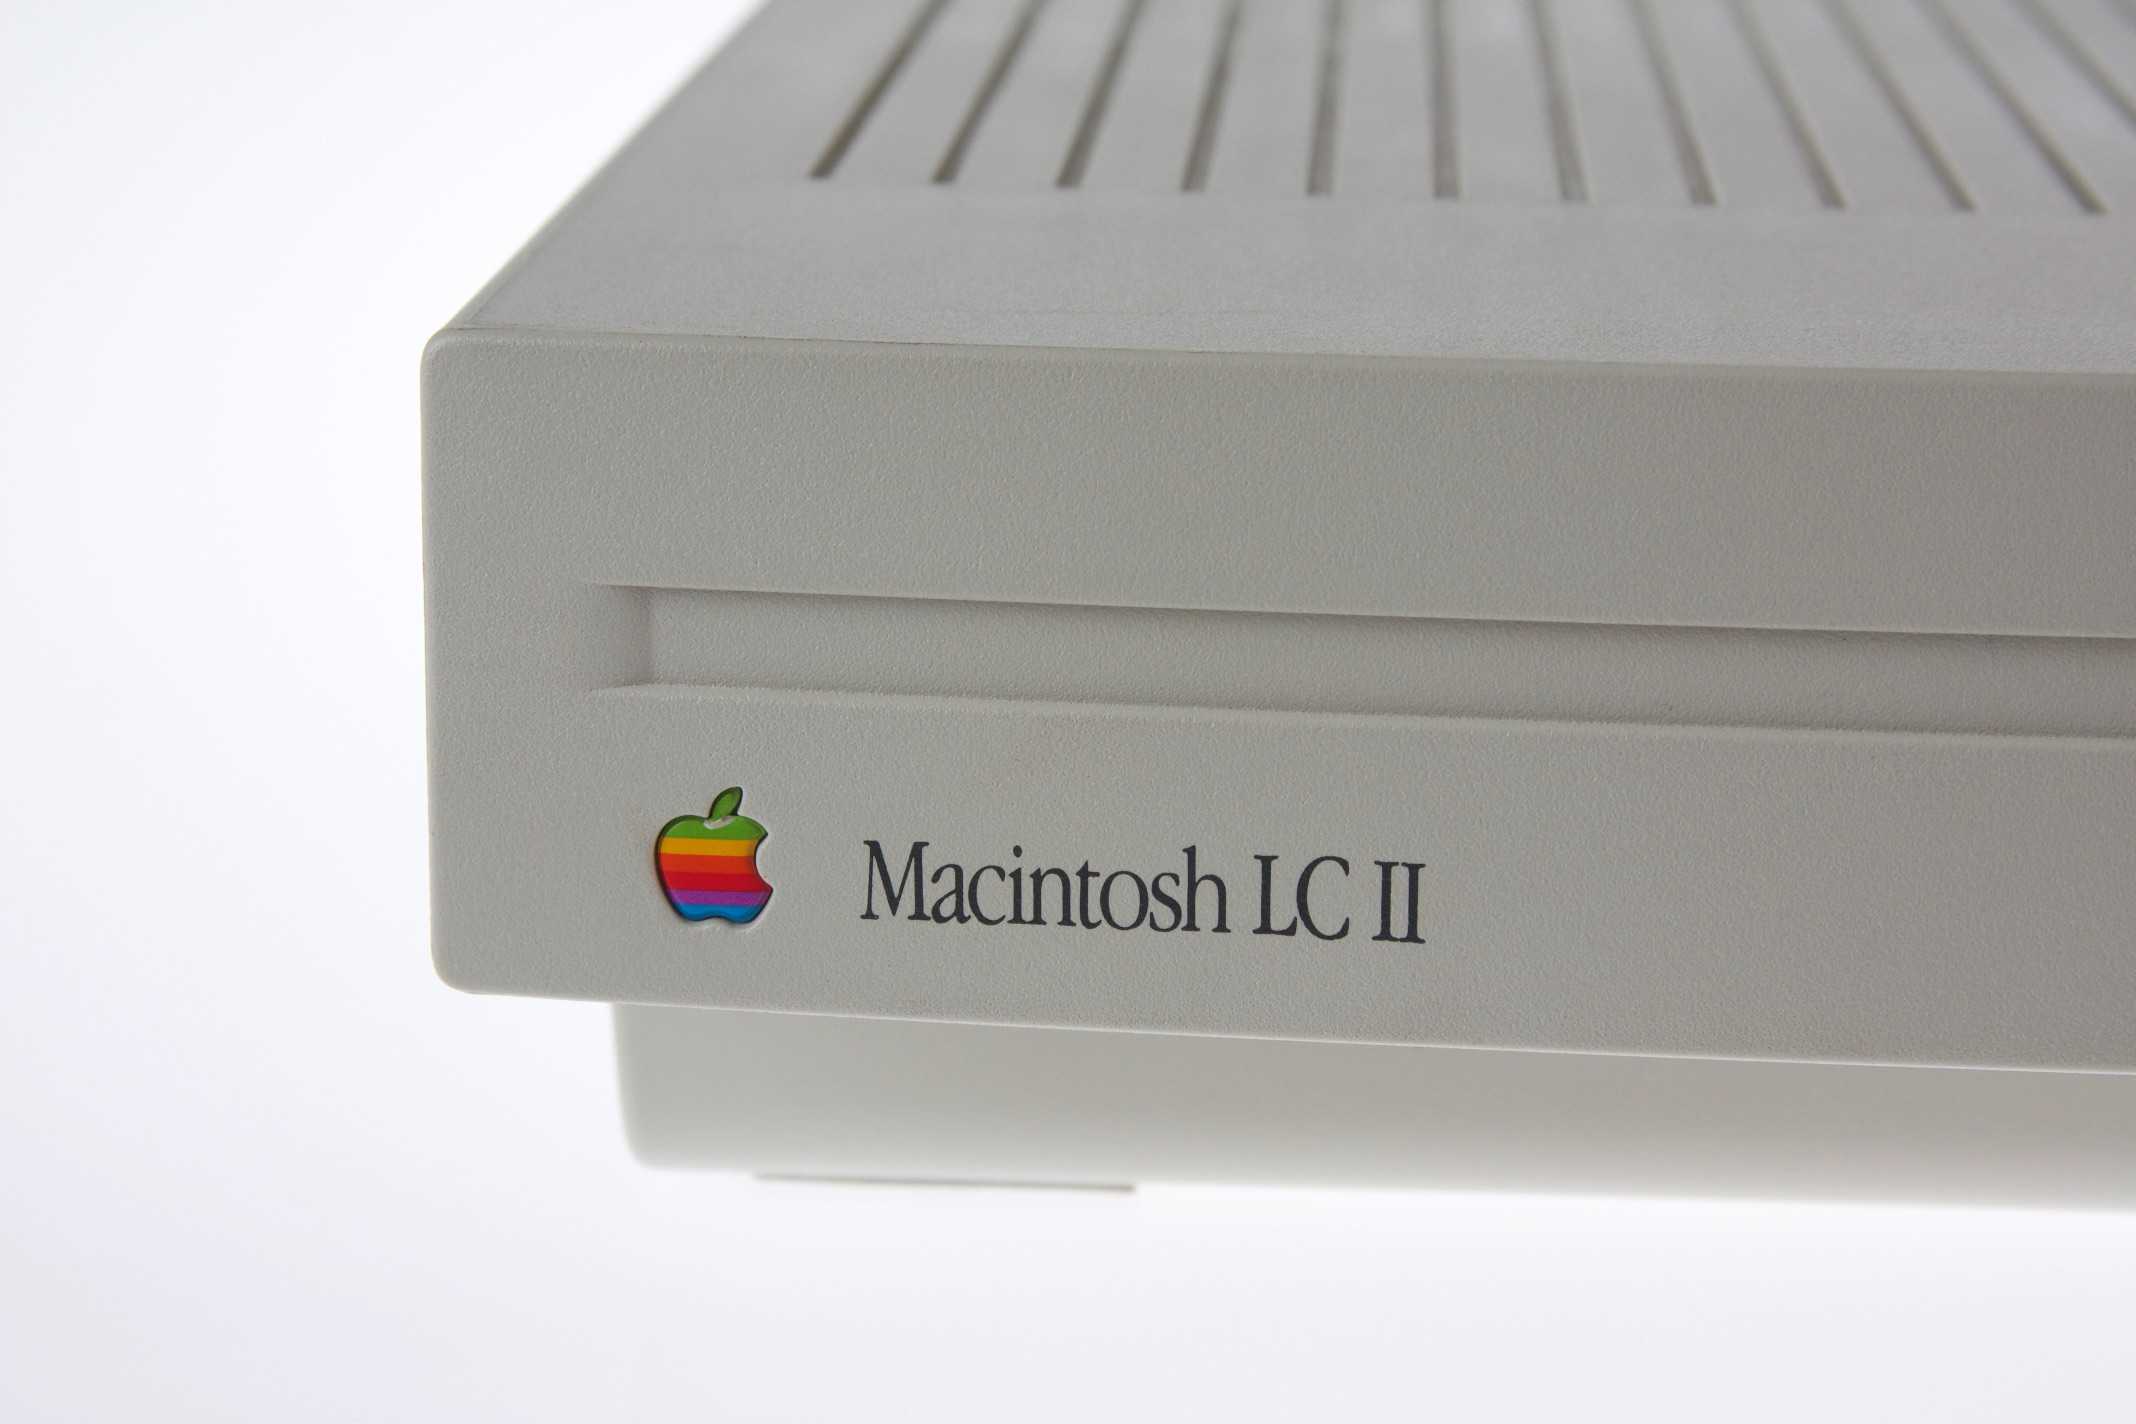 The Macintosh LC II was more powerful and cheaper than its predecessor.